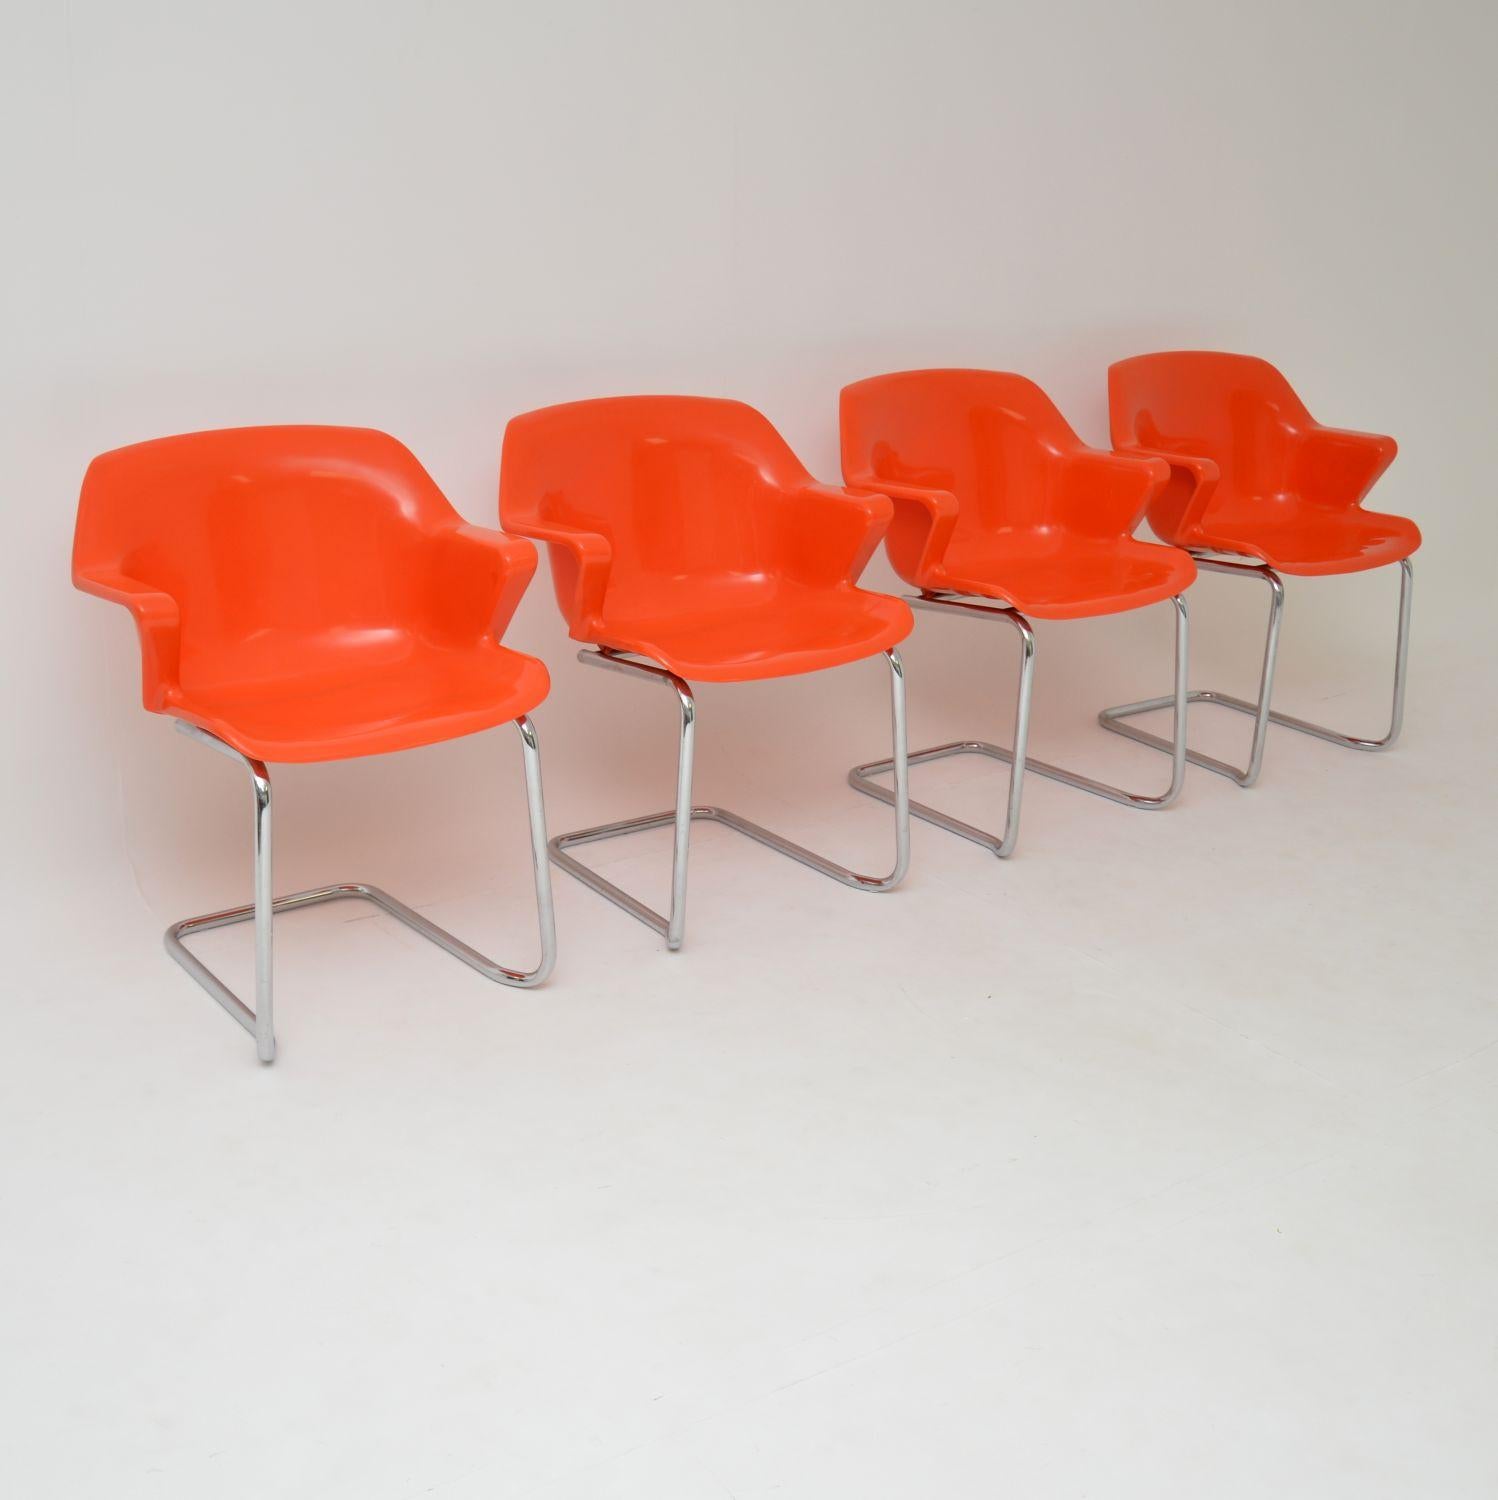 A stylish and extremely rare set of ‘Steelux’ dining chairs, these were designed by Robert Heritage, they date from the 1960s.

They are of amazing quality, with plastic injection moulded seats and cantilevered tubular steel bases.

The design